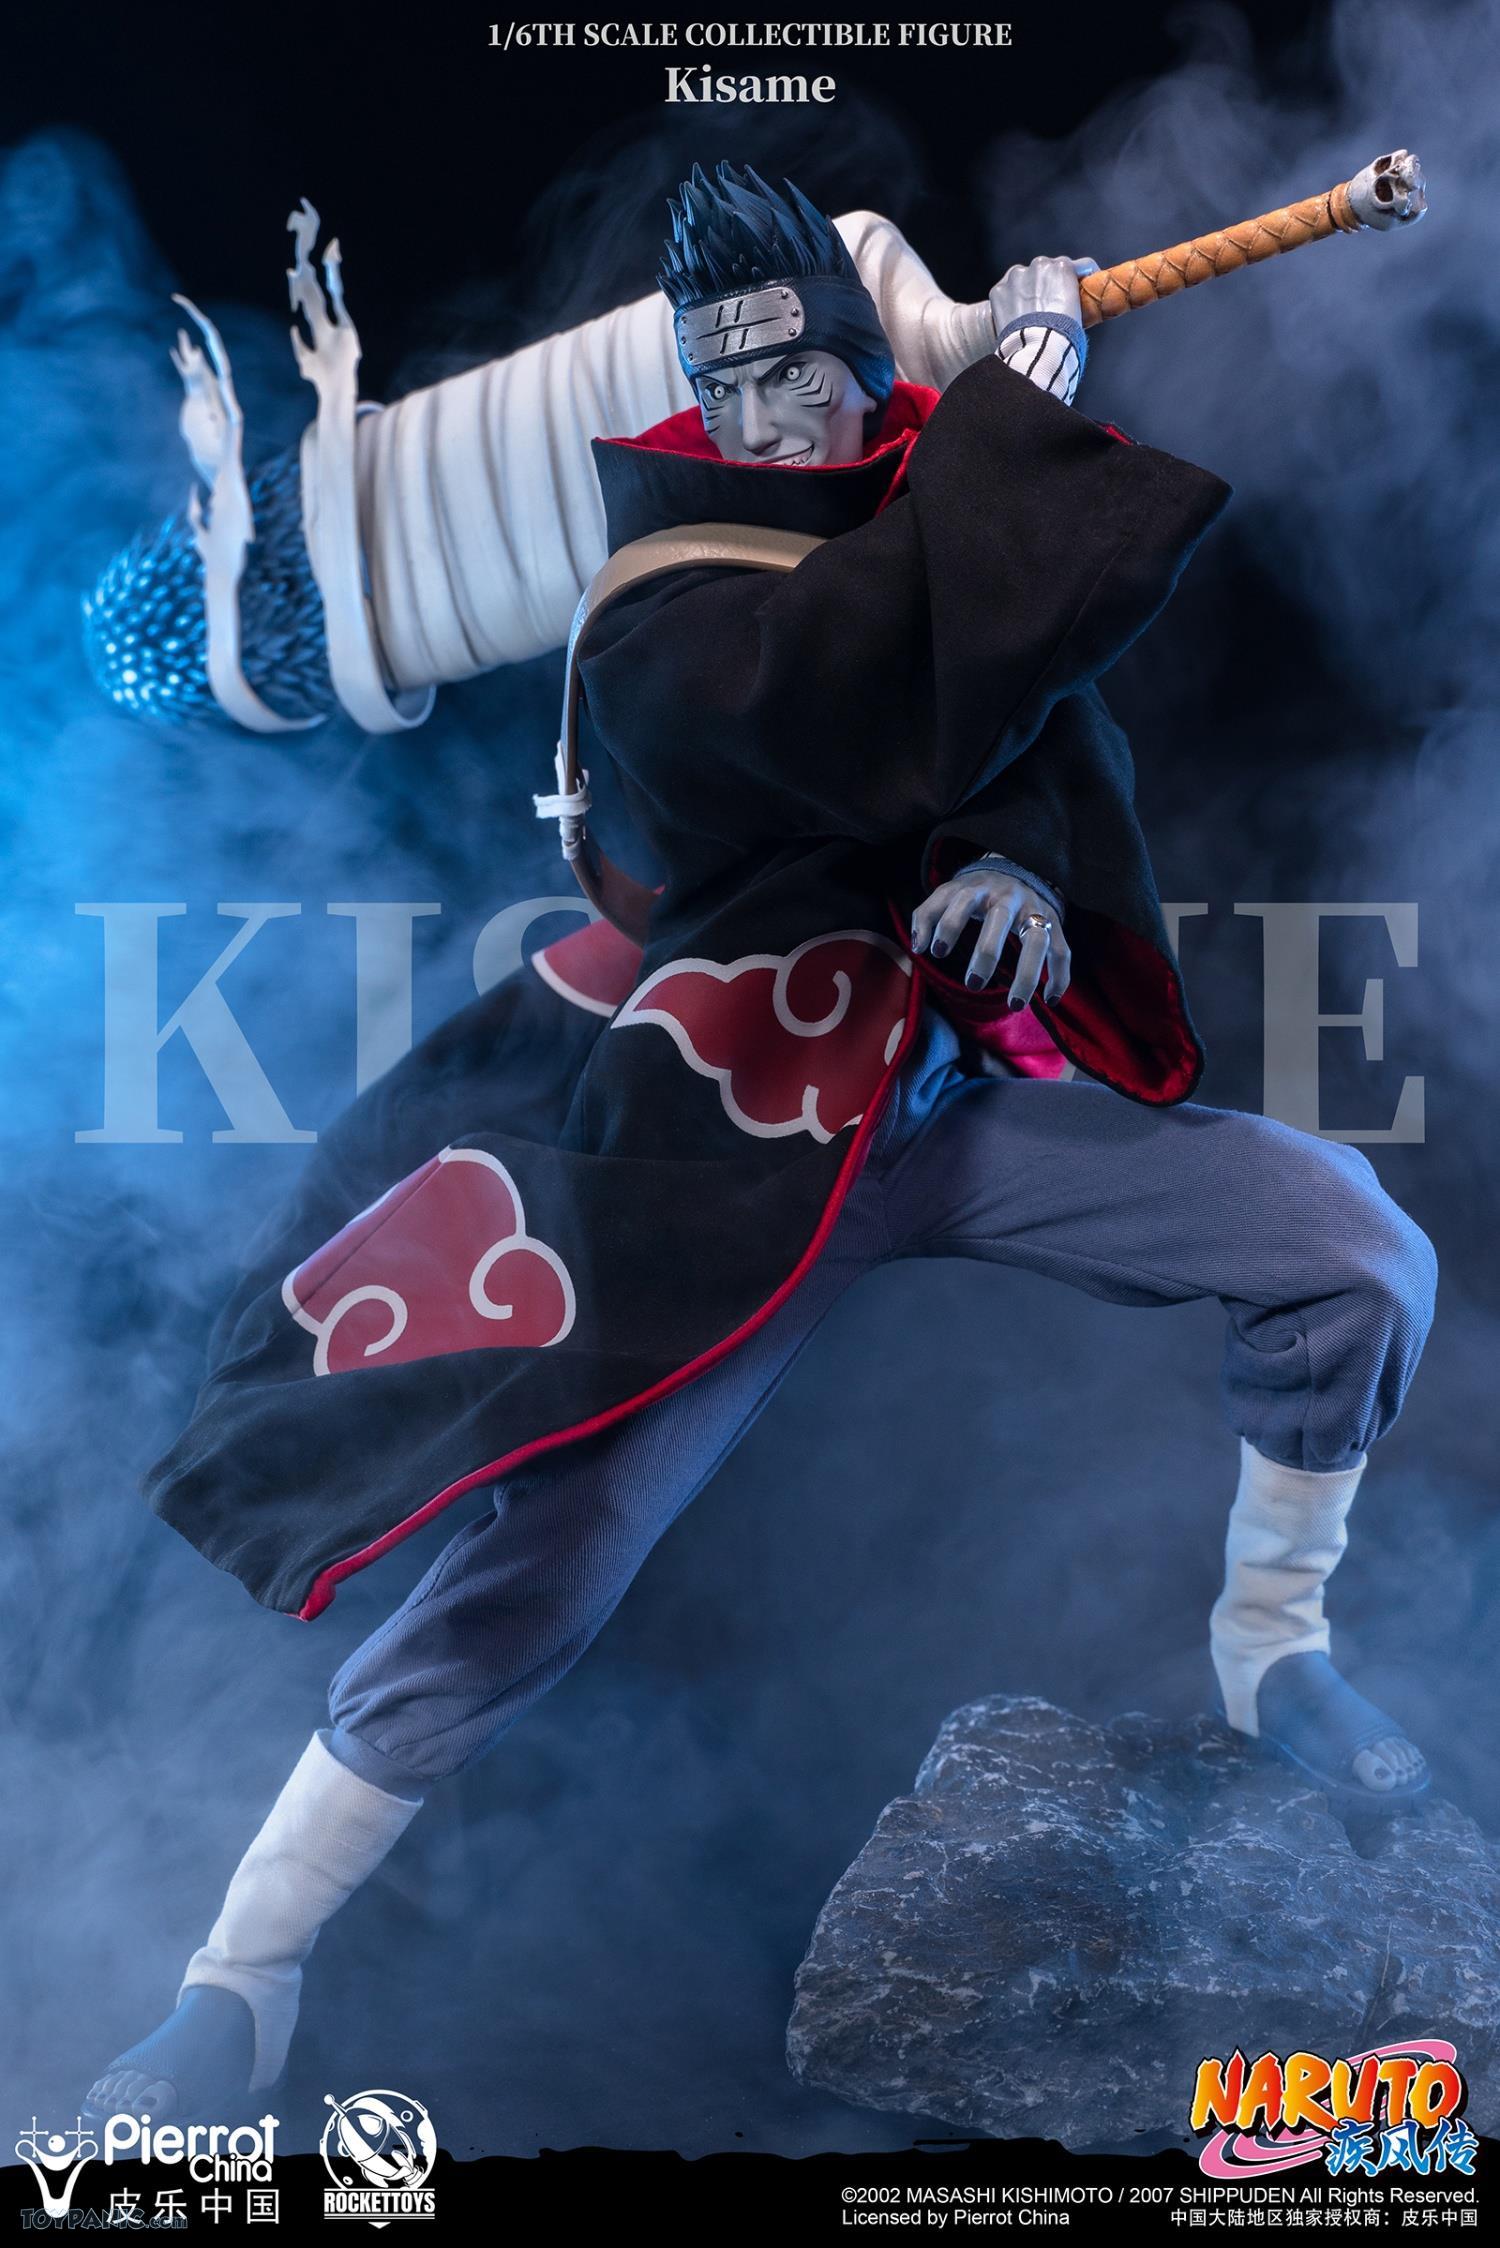 RocketToys - NEW PRODUCT: Rocket Toys ROC-007 1/6 Scale Kisame 221202460435PM_6417009